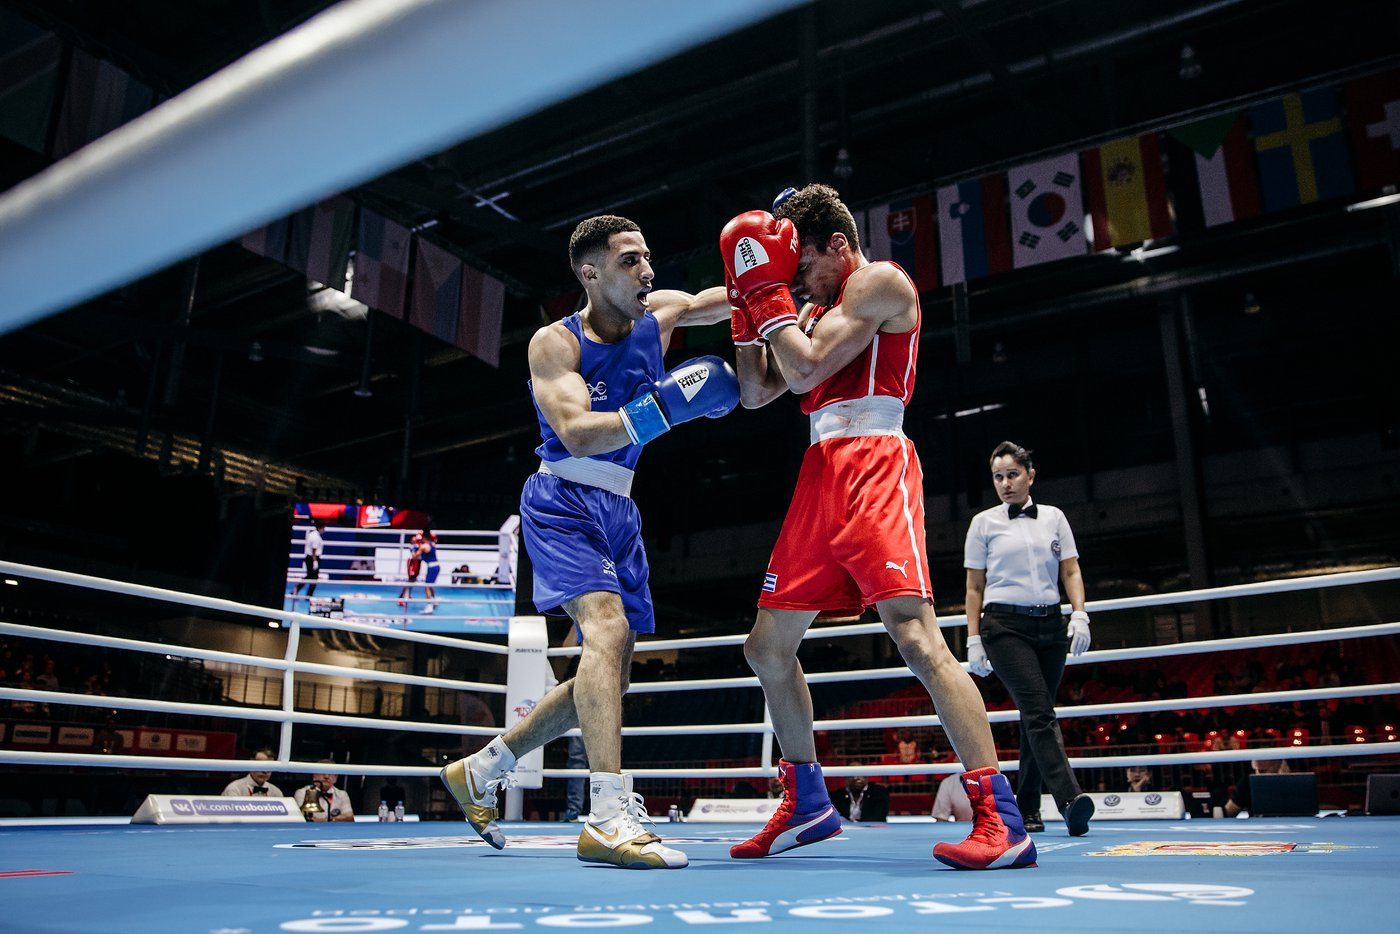 England's Galal Yafai stunned the flyweight top seed and defending champion, Yosvany Veitia of Cuba, recording a unanimous victory ©Yekaterinburg 2019